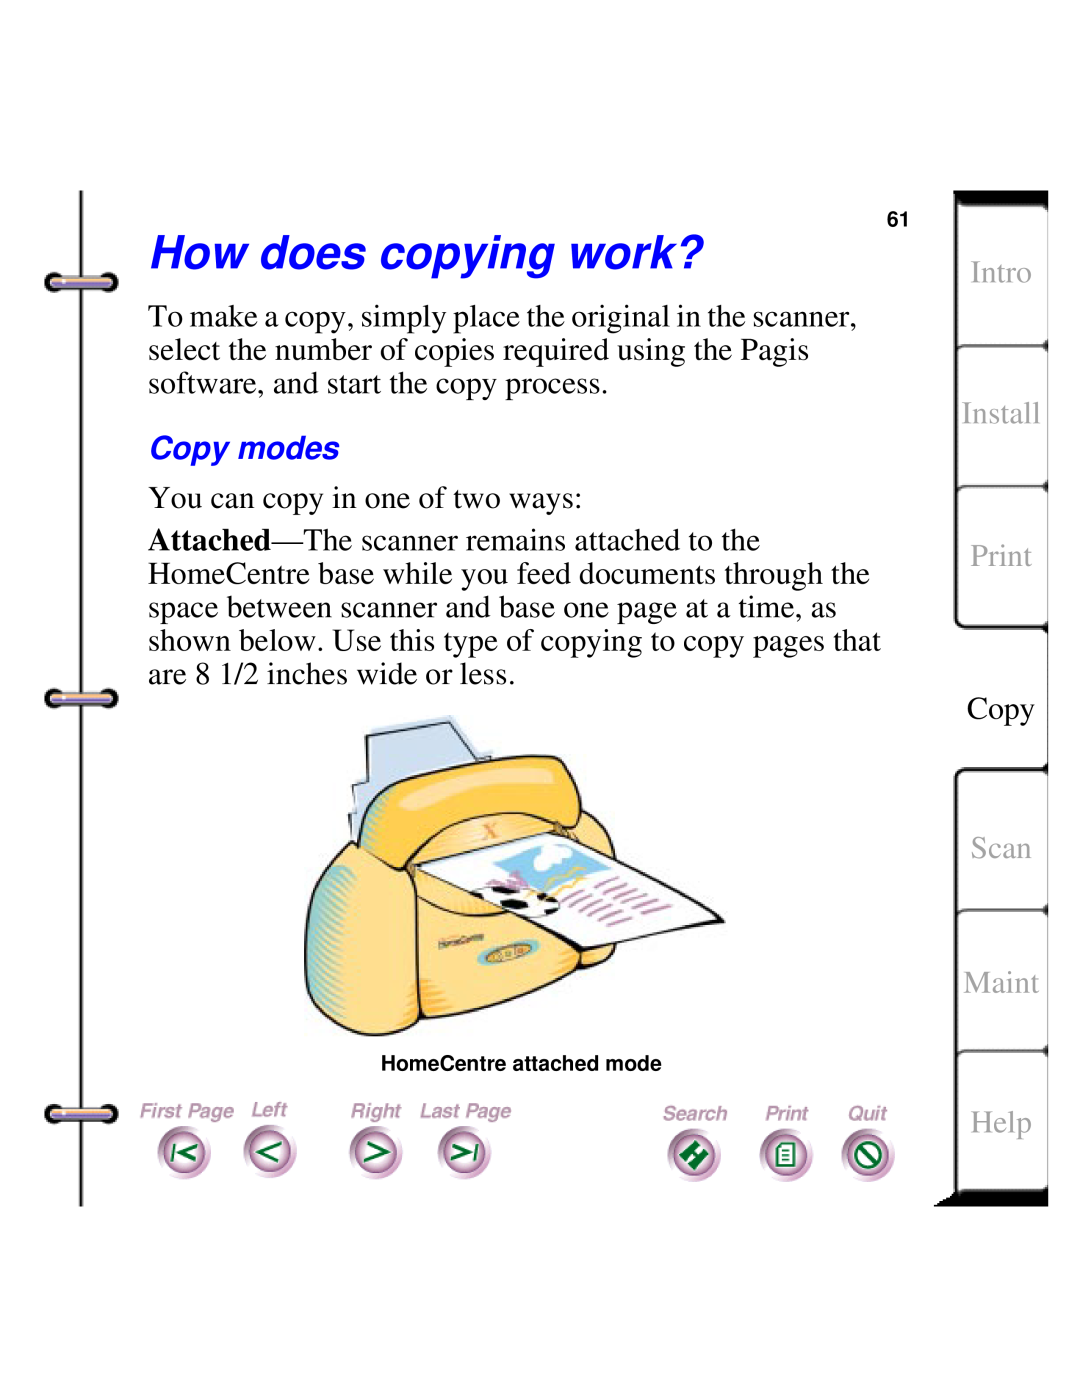 Xerox Document HomeCentre manual How does copying work?, Copy modes, Intro Install Print, Scan Maint, Help 